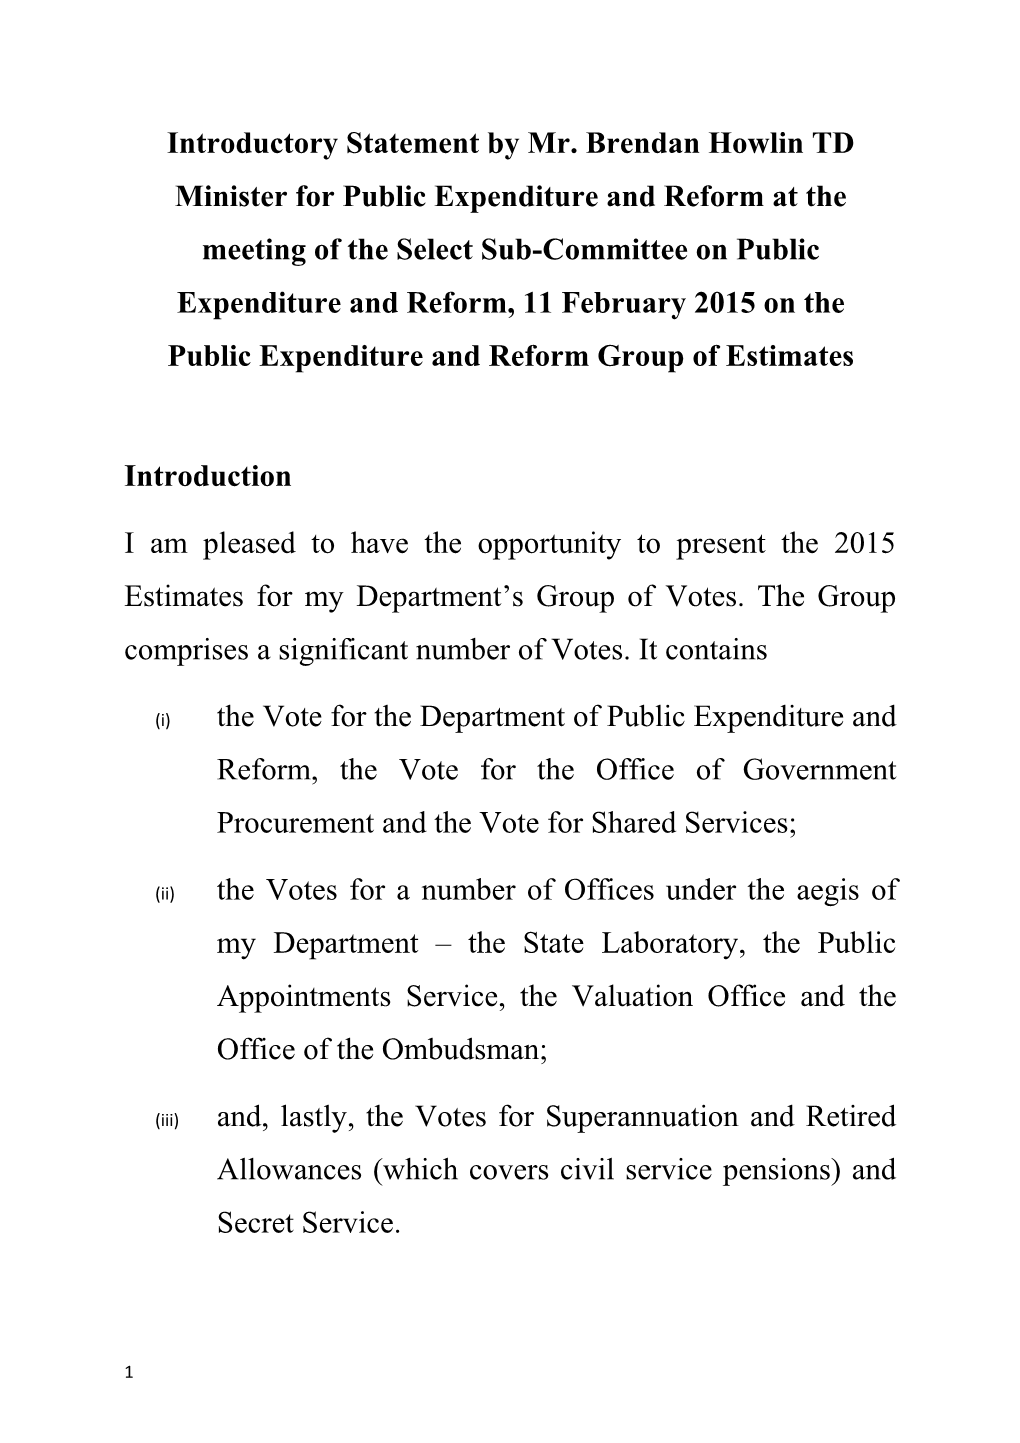 Public Expenditure and Reform Group of Estimates